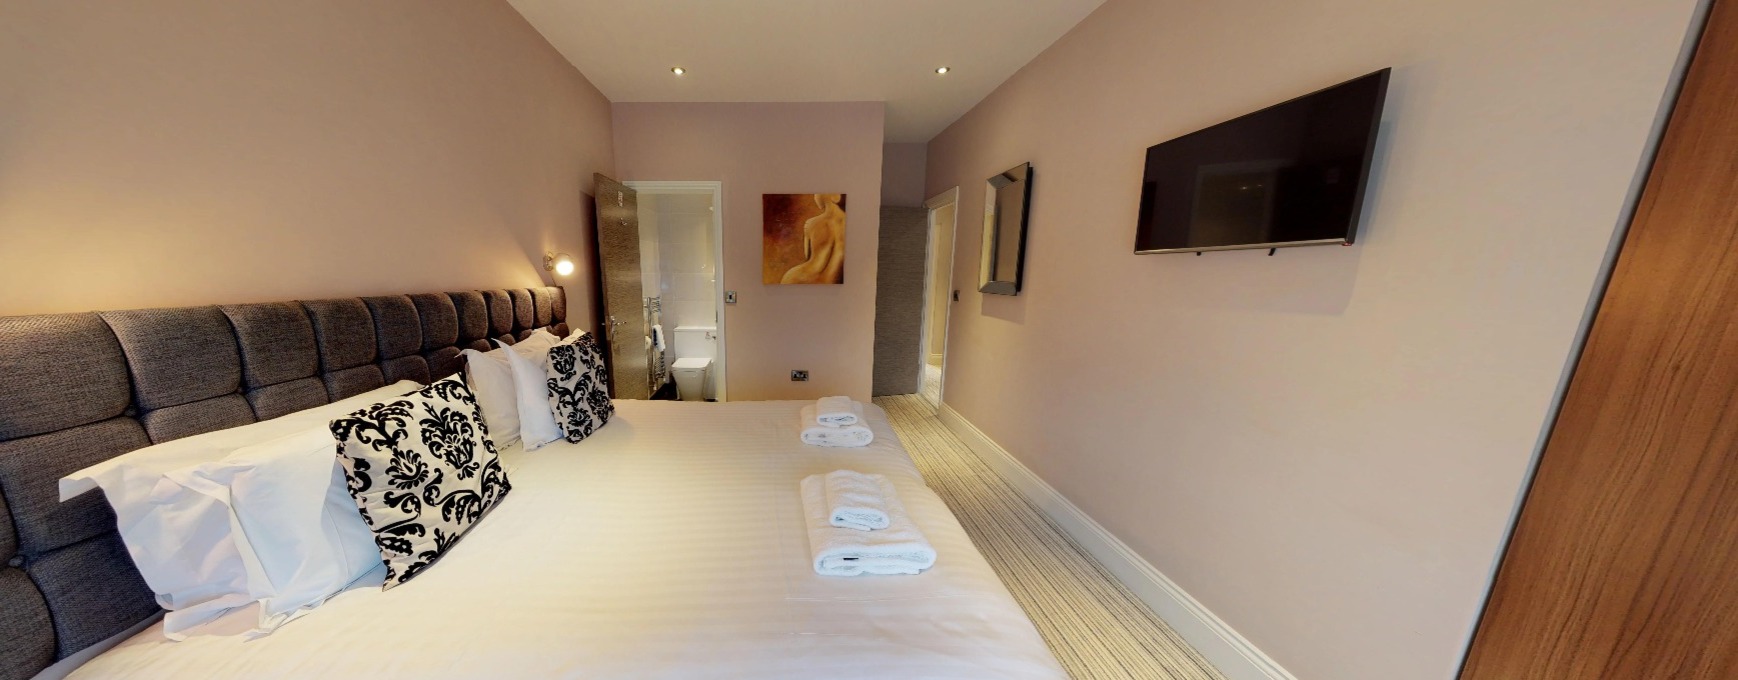 Harrogate Lifestyle offers stylish executive two bedroom two bathroom apartment for up to 4 people with double or twin bed set up facility. For Bookings Call now - 01423 568820